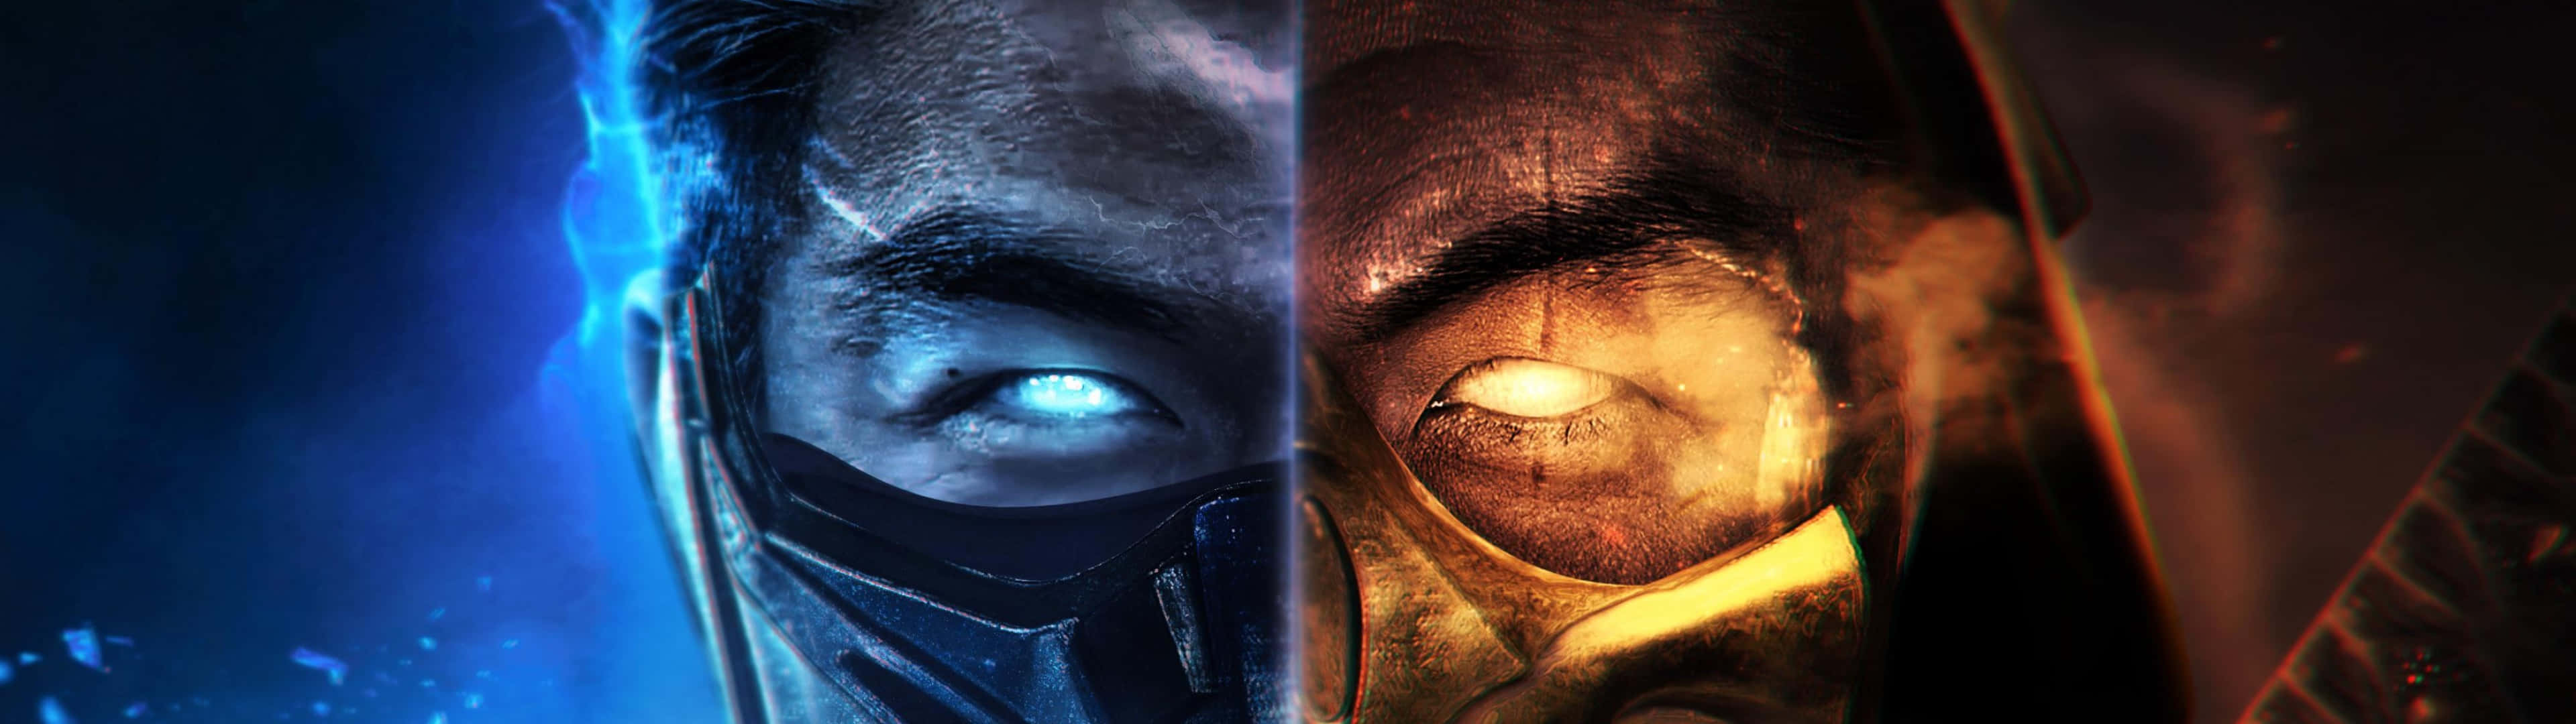 Take A Look At The Latest Fighters In Mortal Kombat 2021 Wallpaper